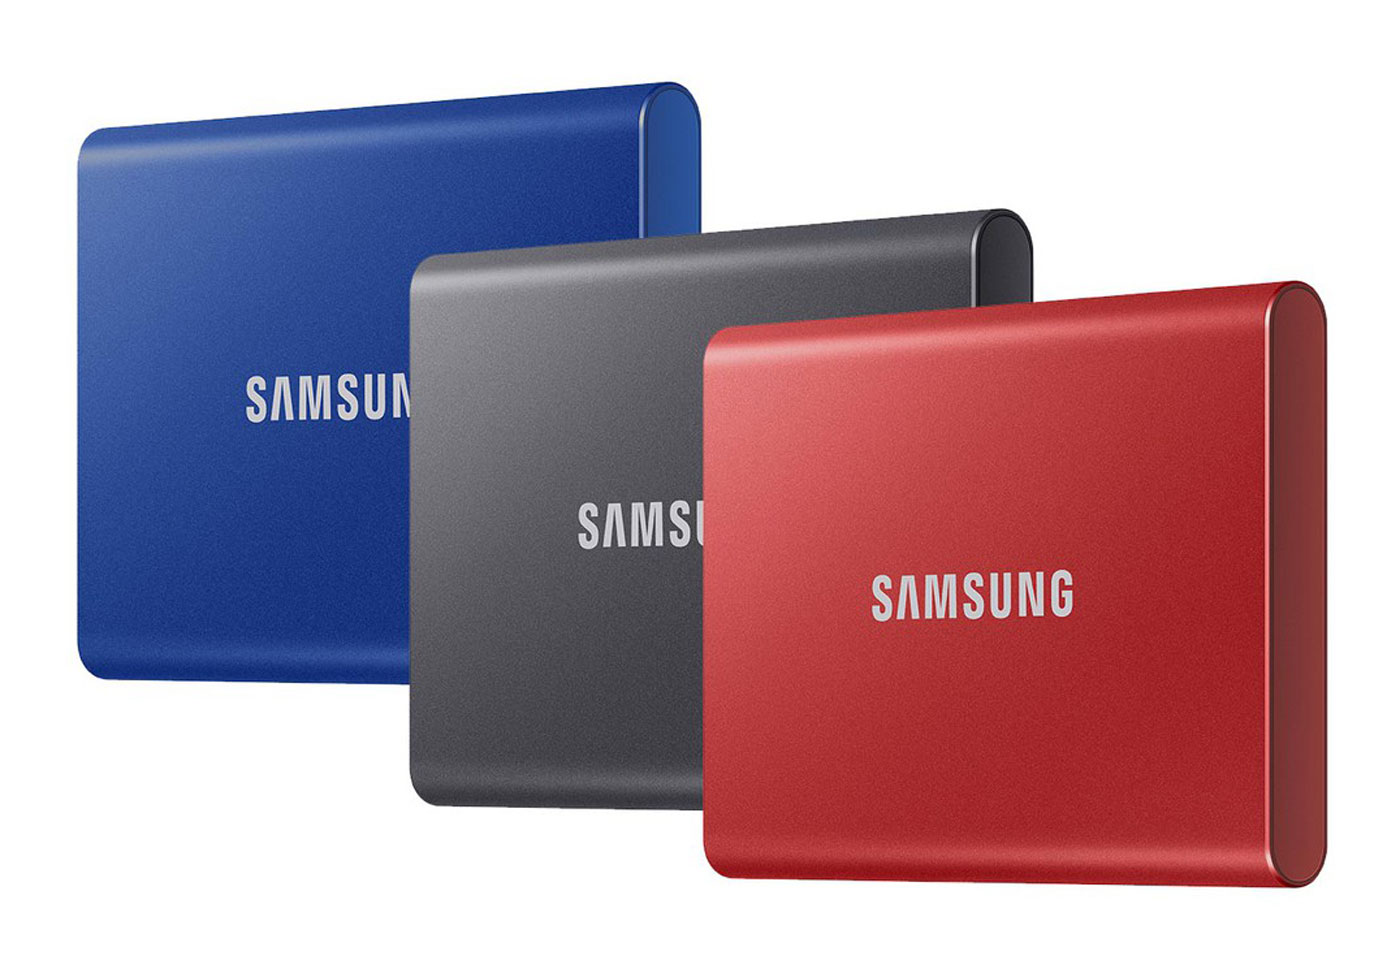 The Samsung T7 Portable SSD.